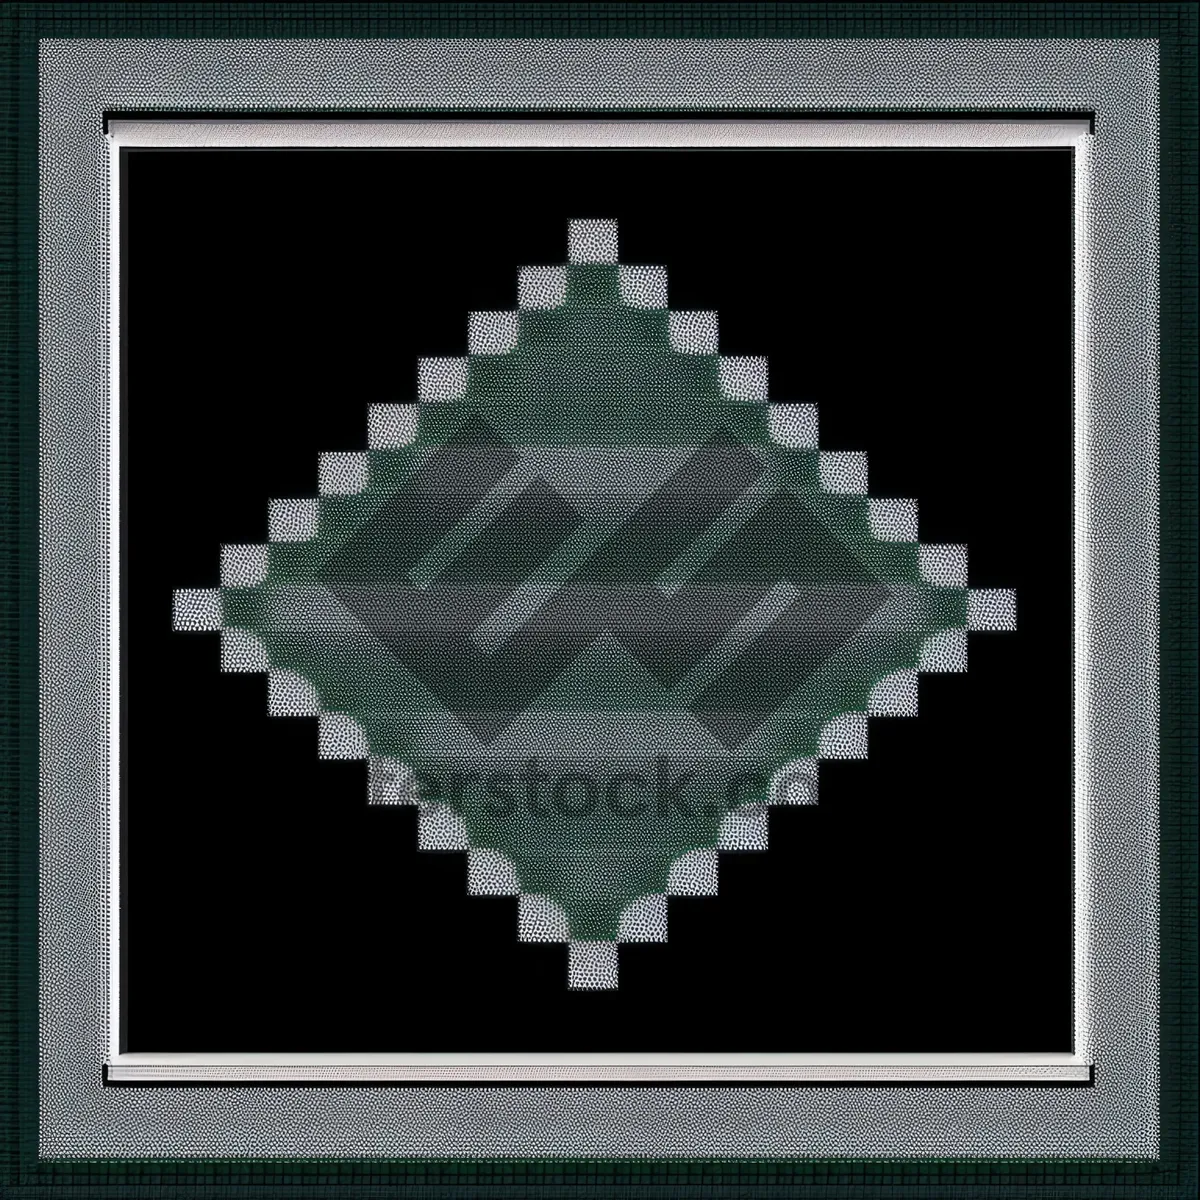 Picture of Artistic Frame Design with Insulating Material - Blank Decorative